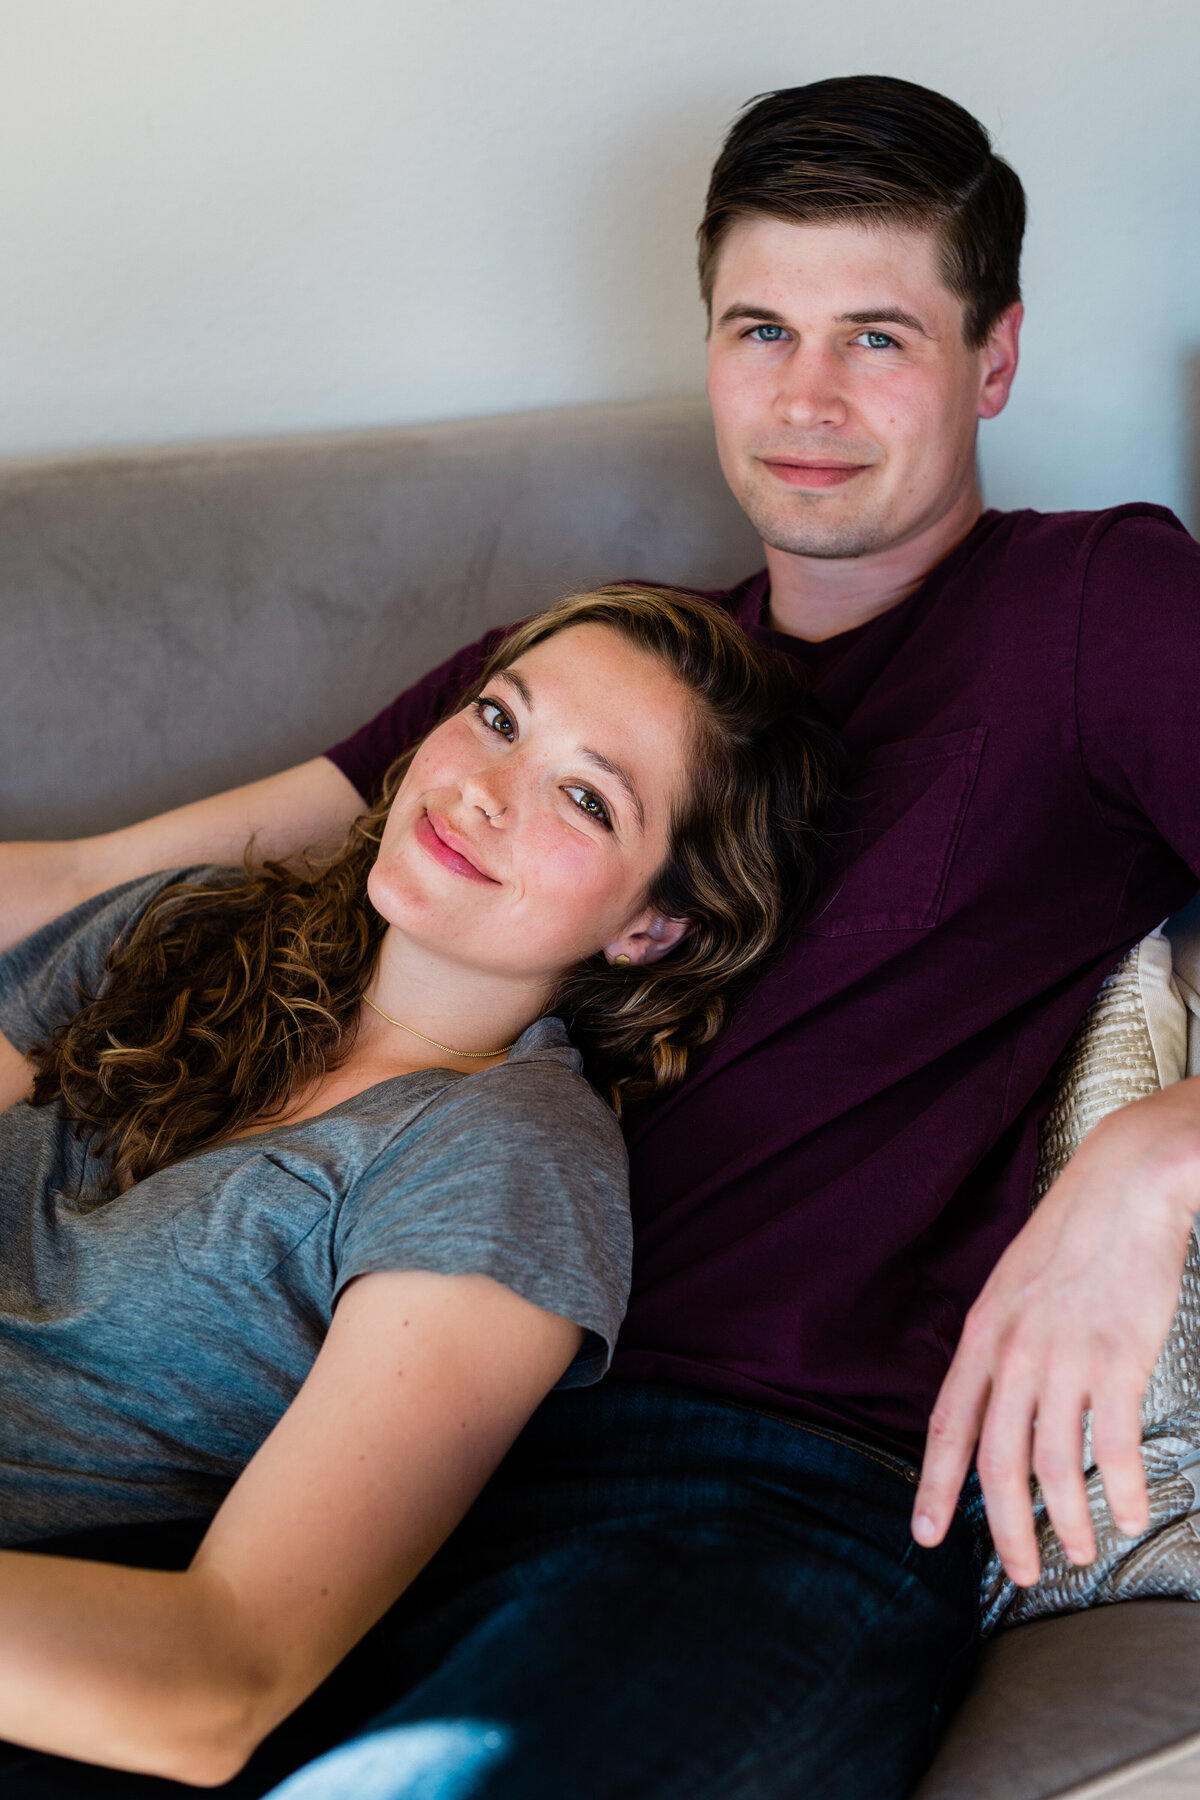 A photographer and her husband hanging out on the couch.